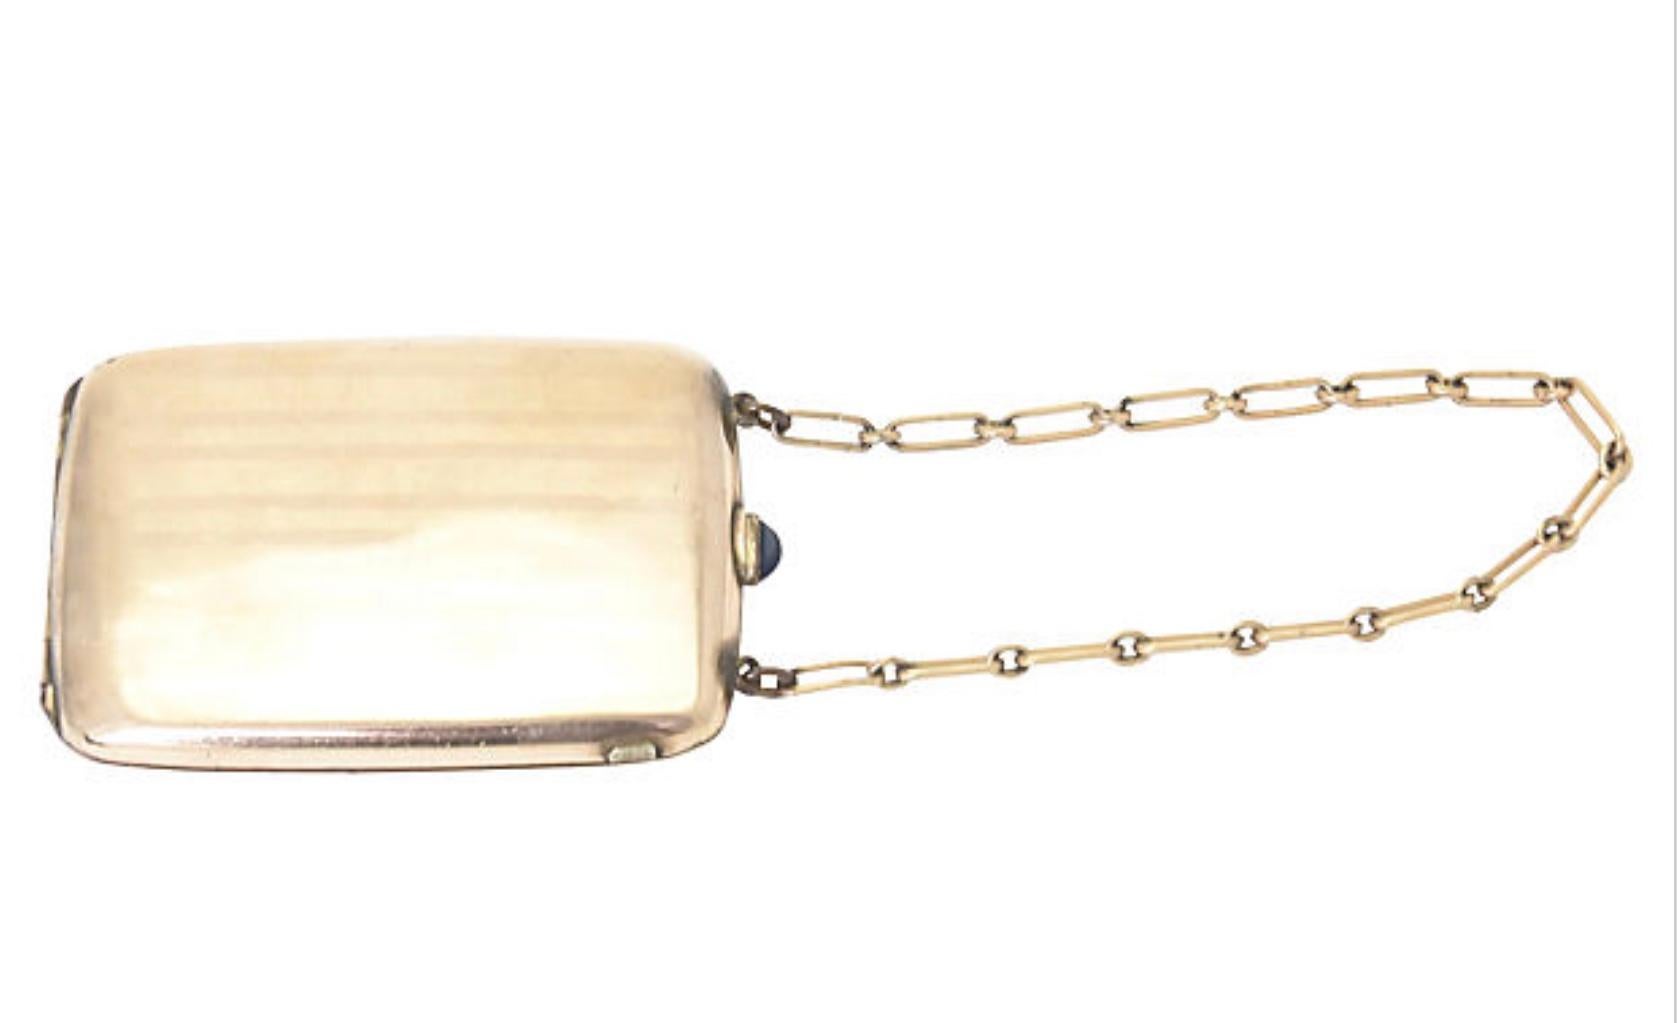 Art Deco Wightman & Hough Gold Filled Compact Purse featuring an etched line design with an area on the front to add initials. I have a faux sapphire push closure and hangs from an open link oval & round link chain. Inside one side is a mirror the